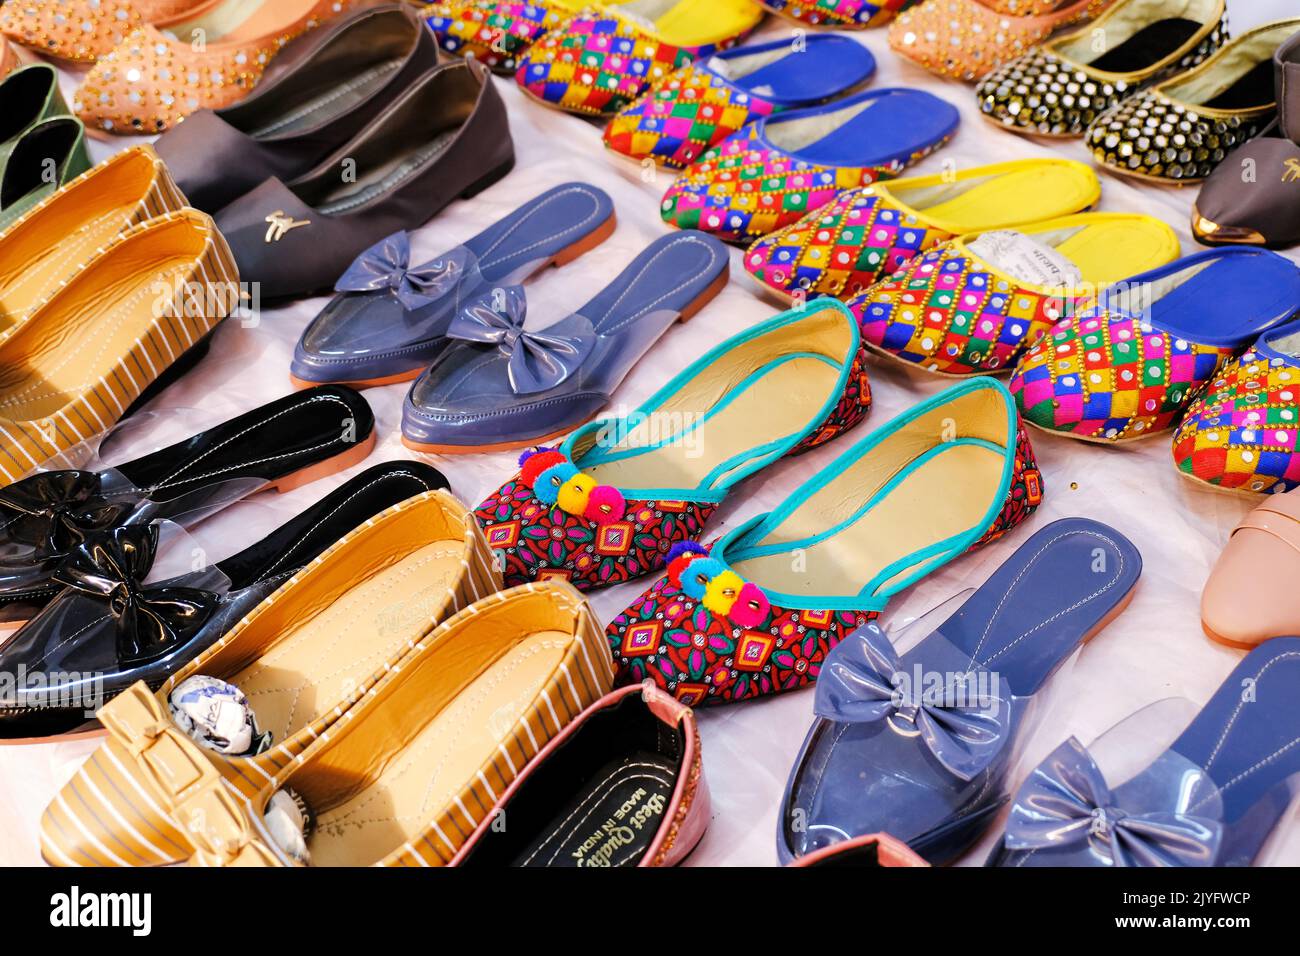 Colorful Handmade chappals (sandals) being sold in an Indian market, Handmade leather slippers, Traditional footwear. Stock Photo